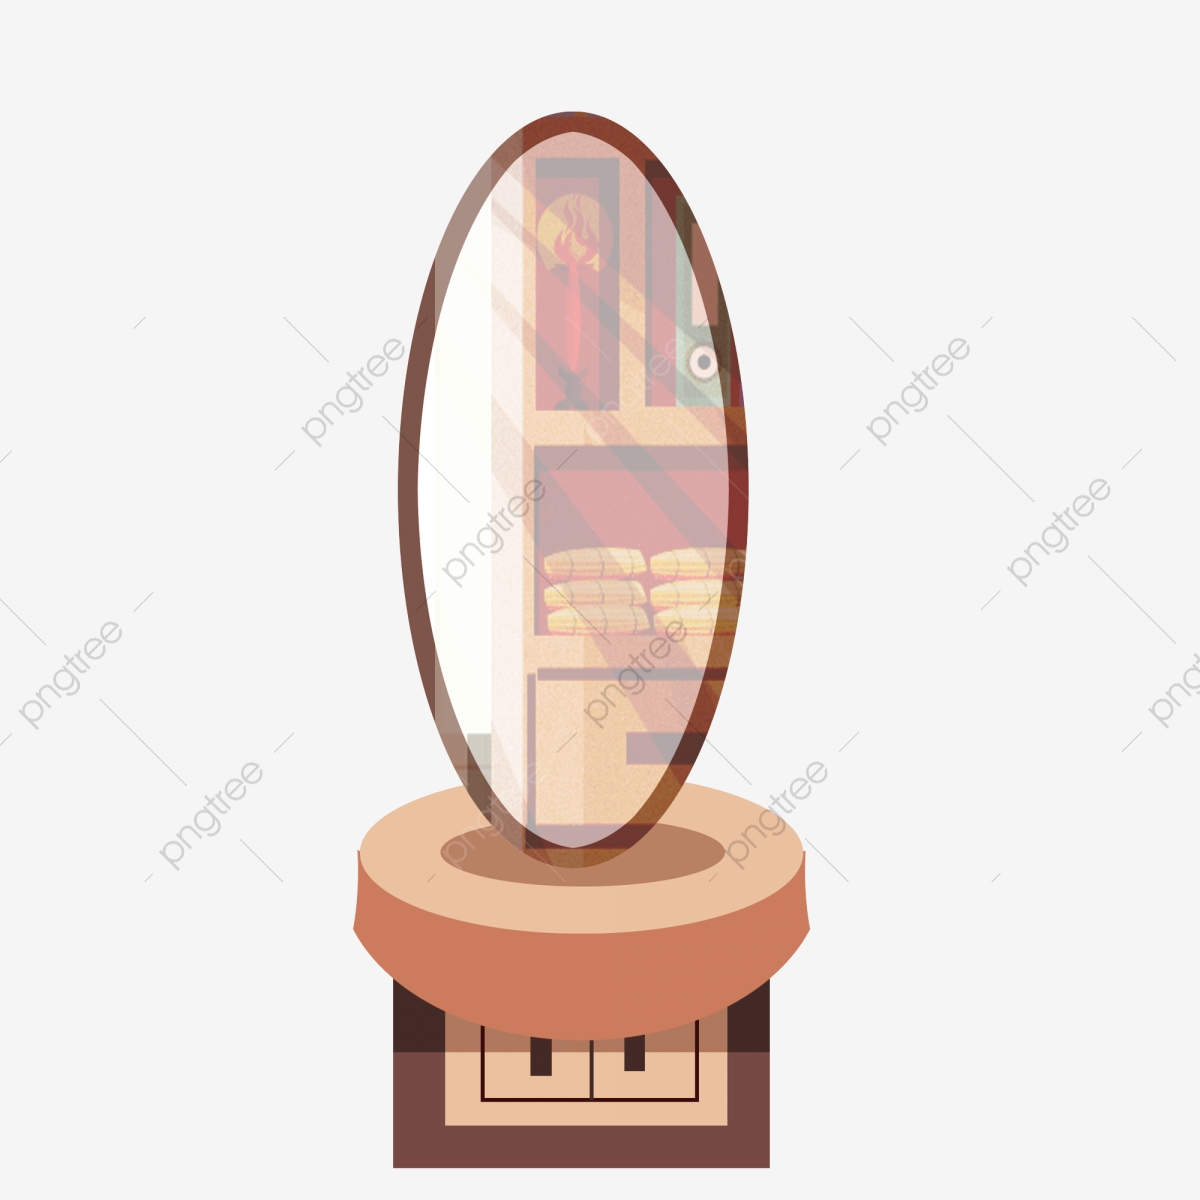 mirror clipart simple hand